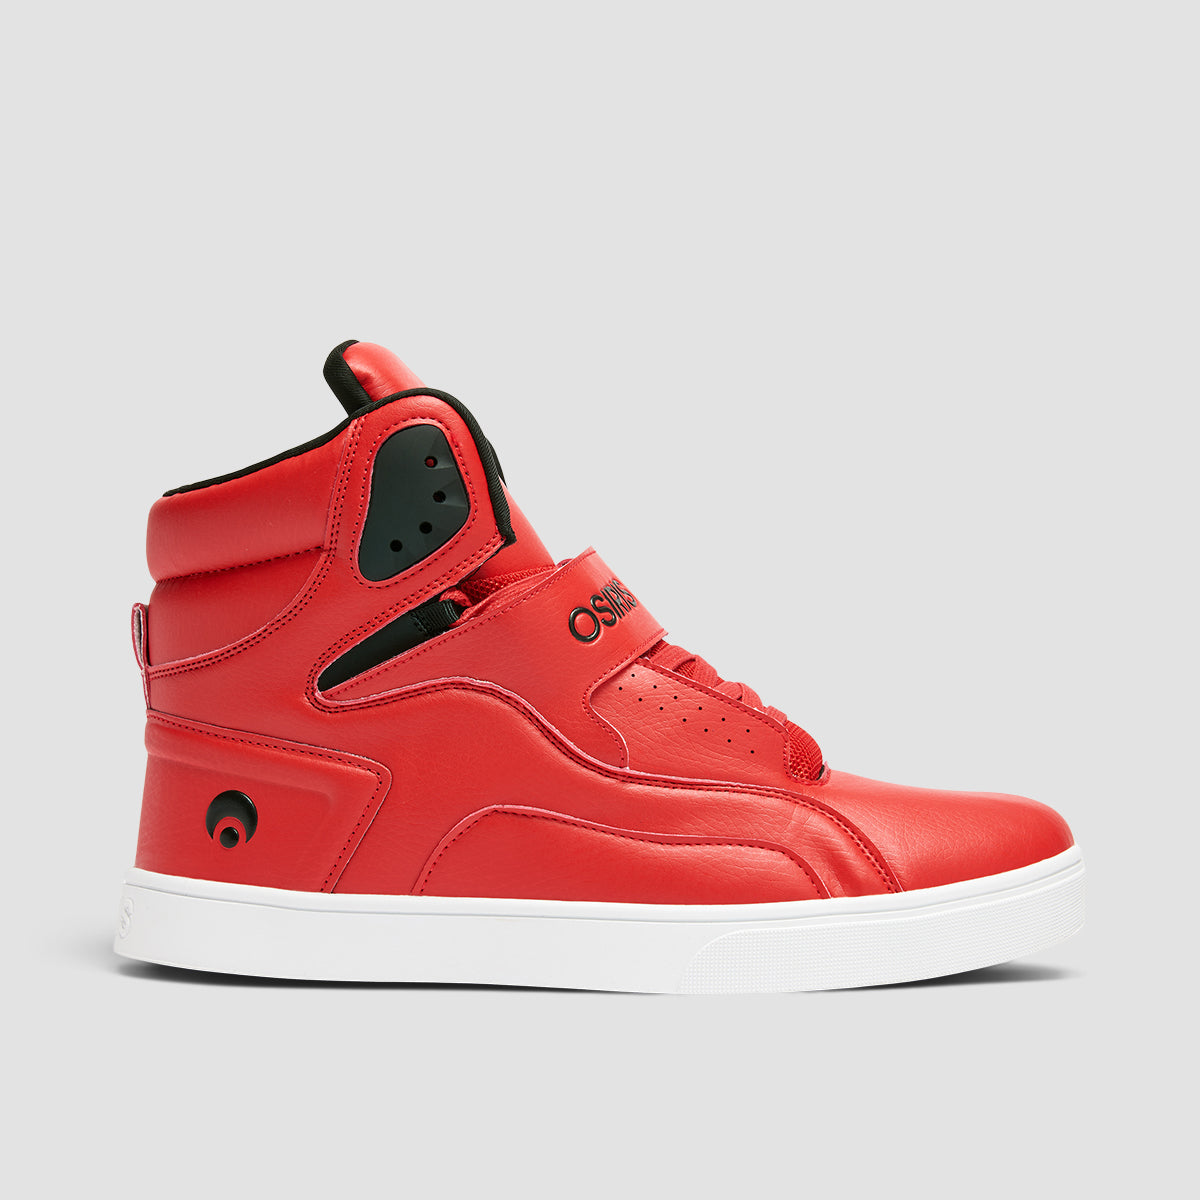 Osiris Rize Ultra High Top Shoes - Red/Red/Black